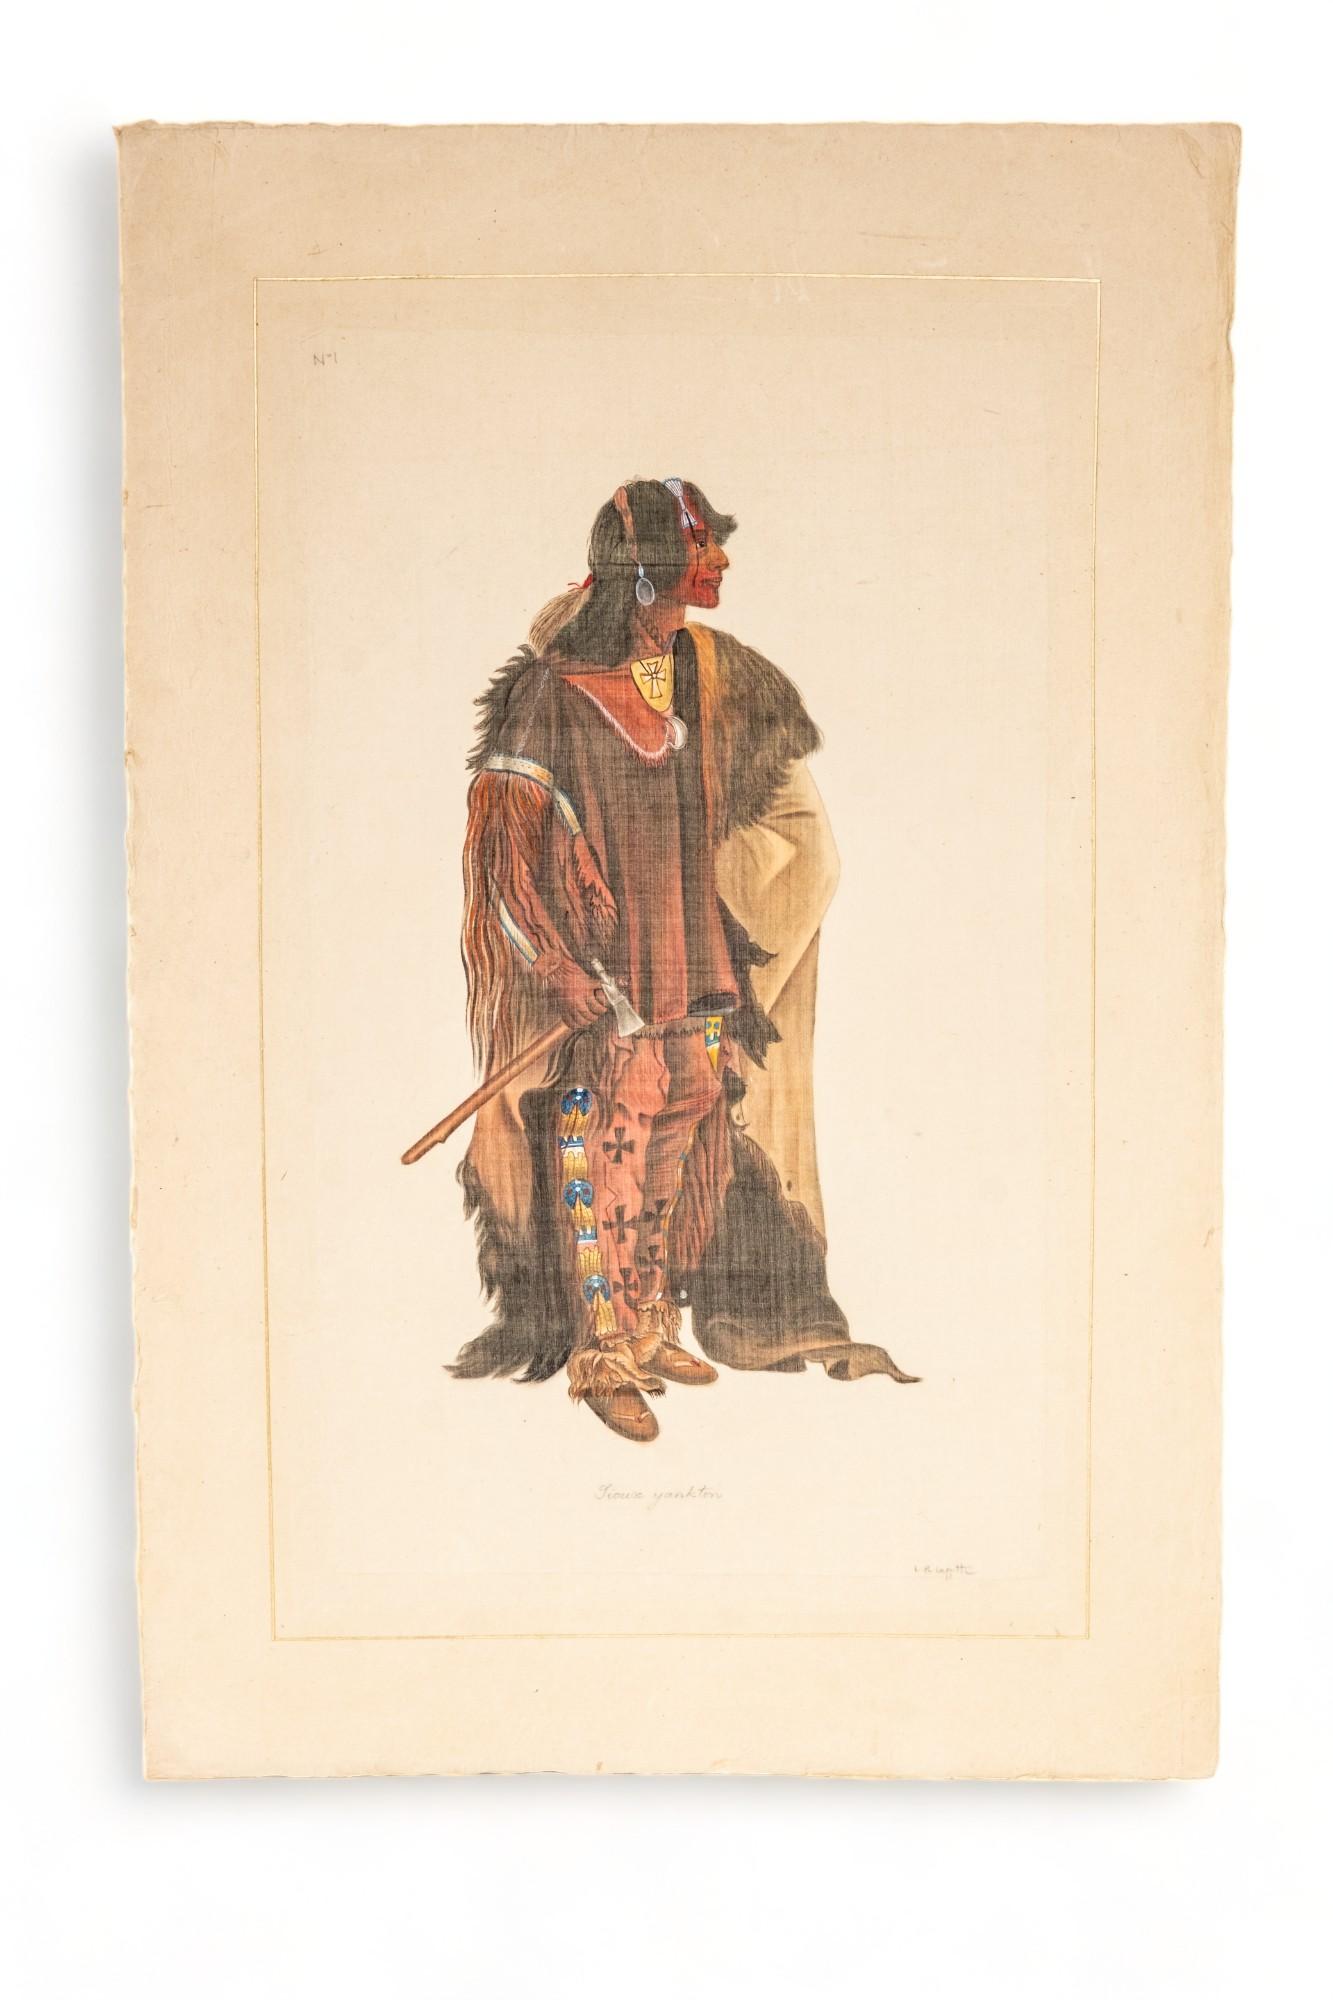 Signed L.R Laffitte Watercolor of Yankton Sioux on silk mounted on laid paper, Signed at the bottom in pencil. According to local legend, when Meriwether Lewis learned that a male child had been born near the expedition's encampment in what is today